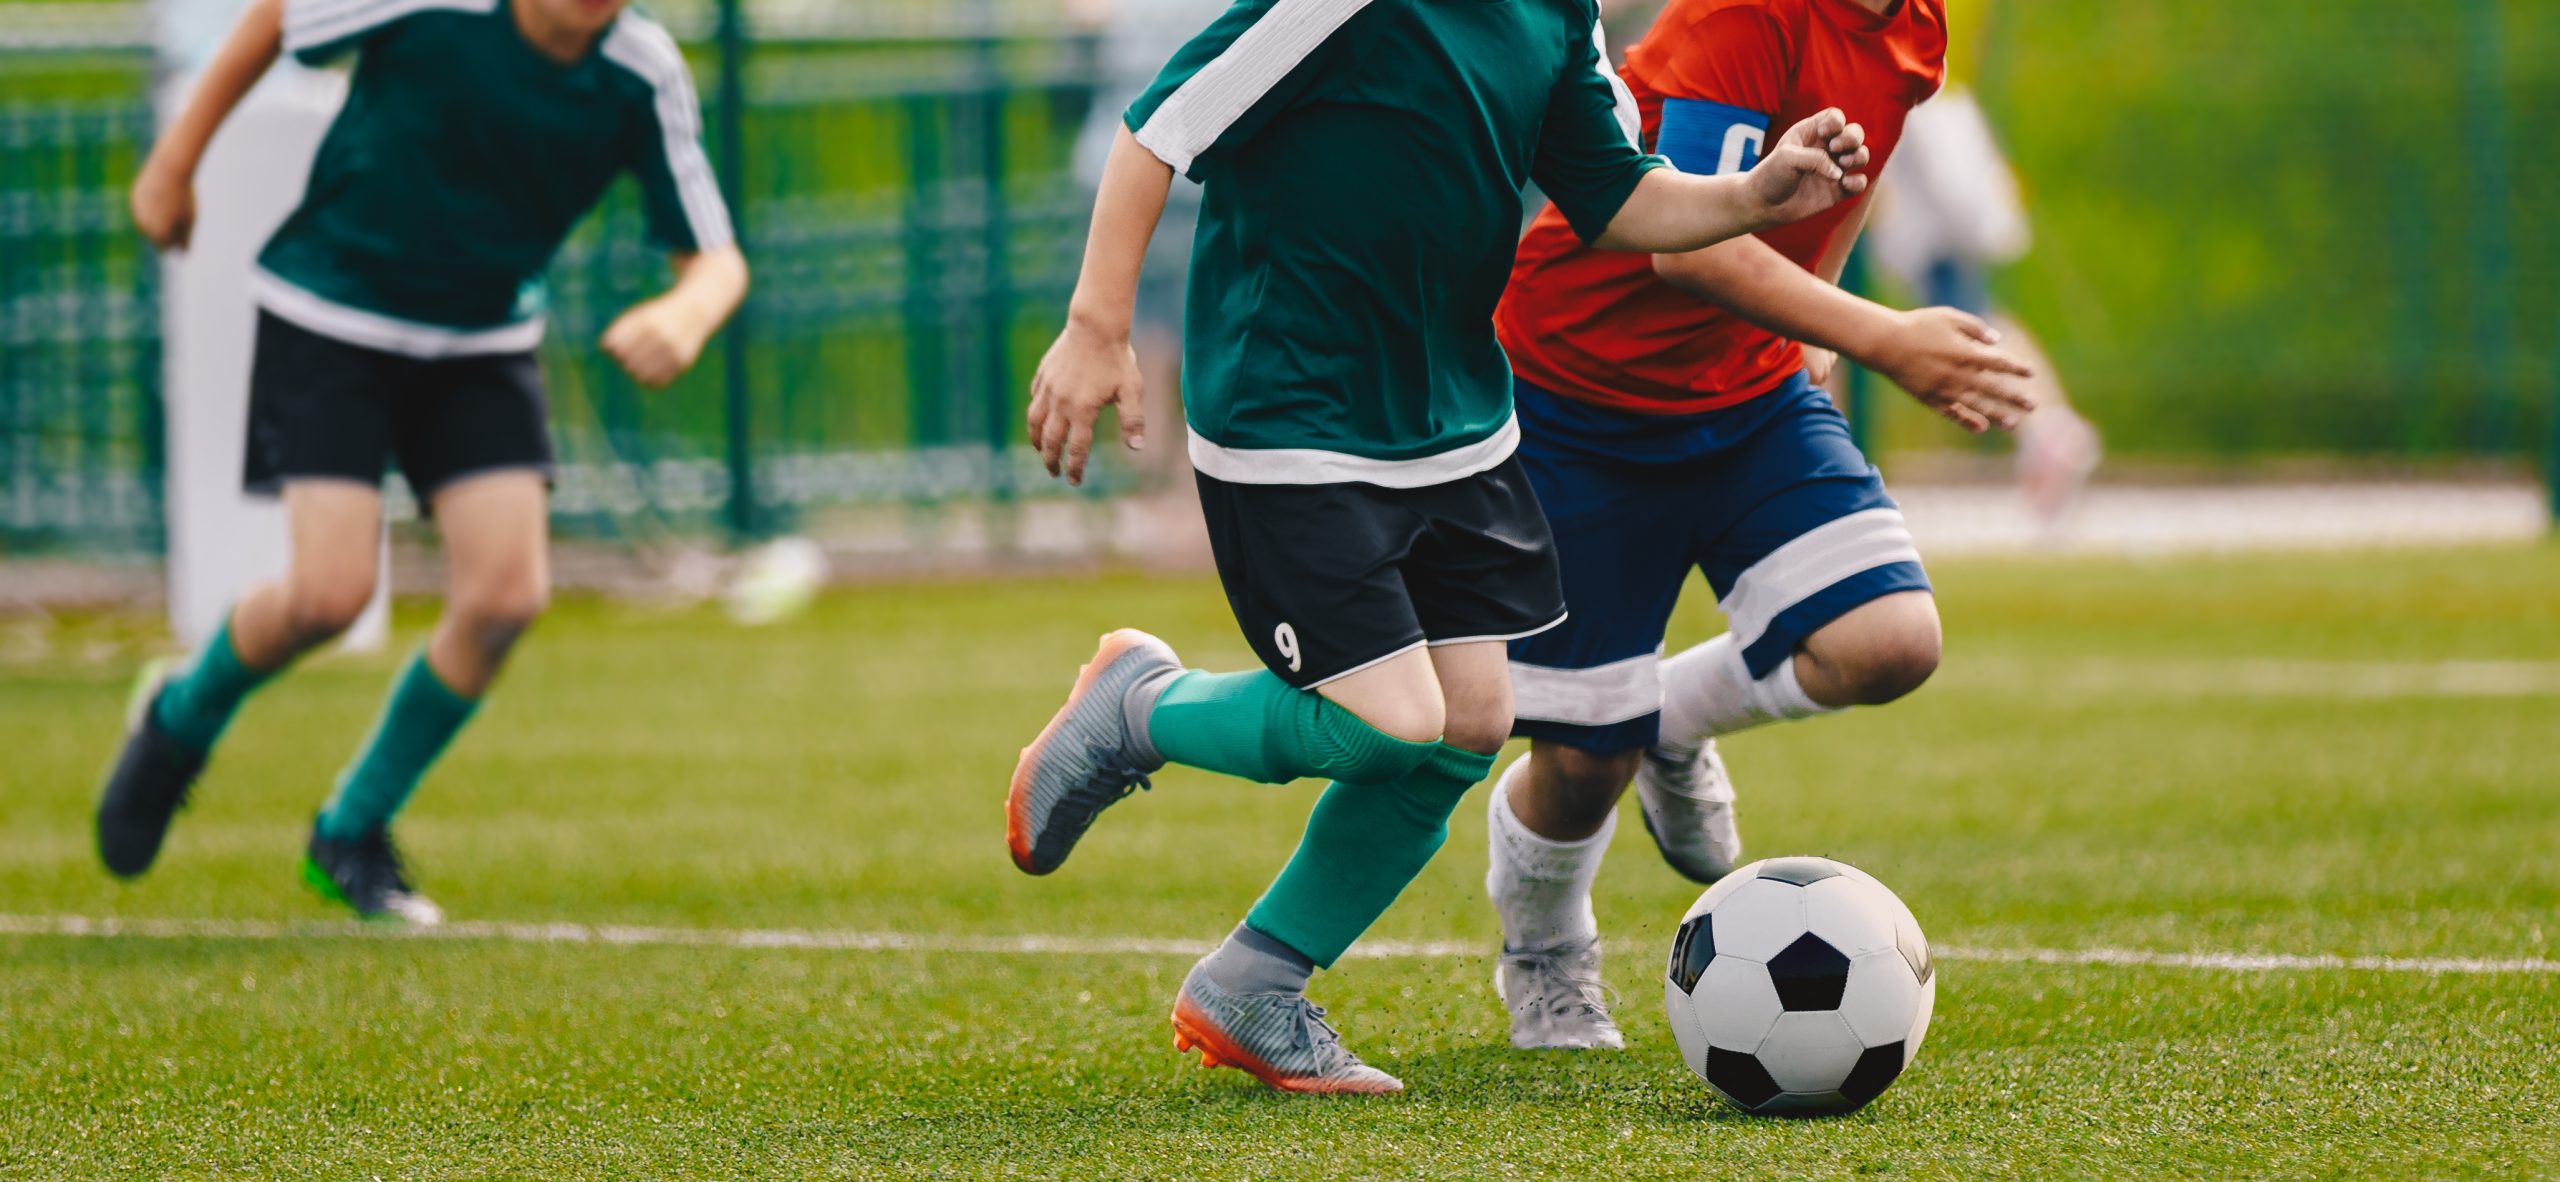 Overuse Injuries In Youth Sports Happen: How To Protect Your Kids